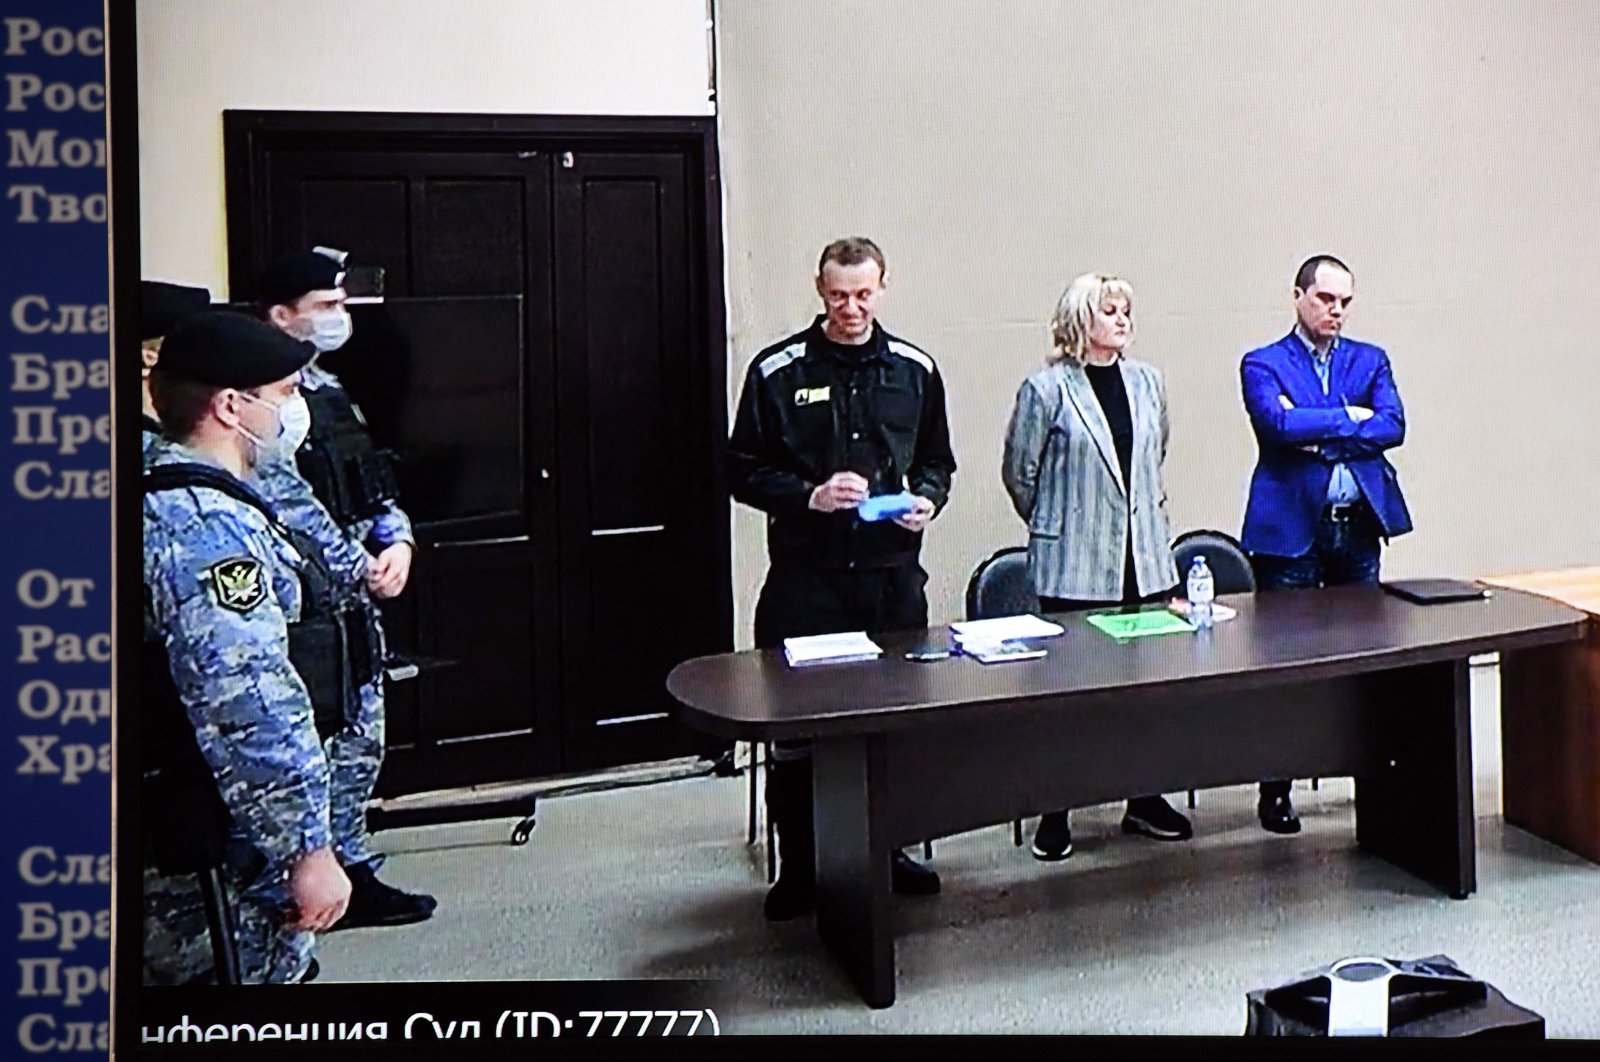 Russian opposition leader Alexei Navalny is seen on a screen via a video link during the verdict in his embezzlement and contempt of court trial at the IK-2 prison colony in the town of Pokrov in the Vladimir region, Russia, March 22, 2022. (AFP Photo)